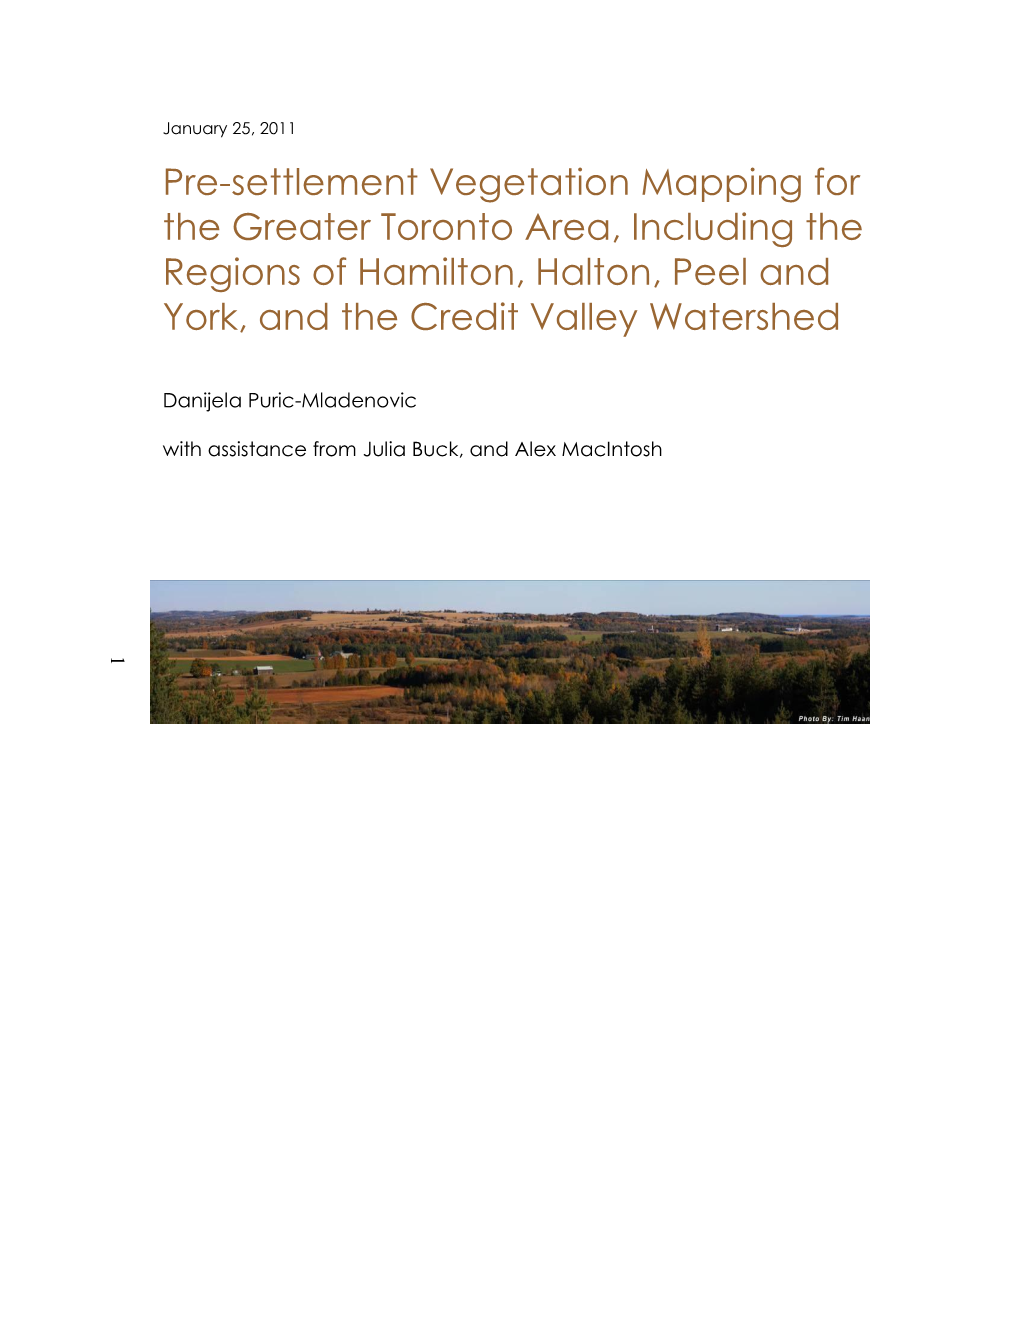 Pre-Settlement Vegetation Mapping for the Greater Toronto Area, Including The